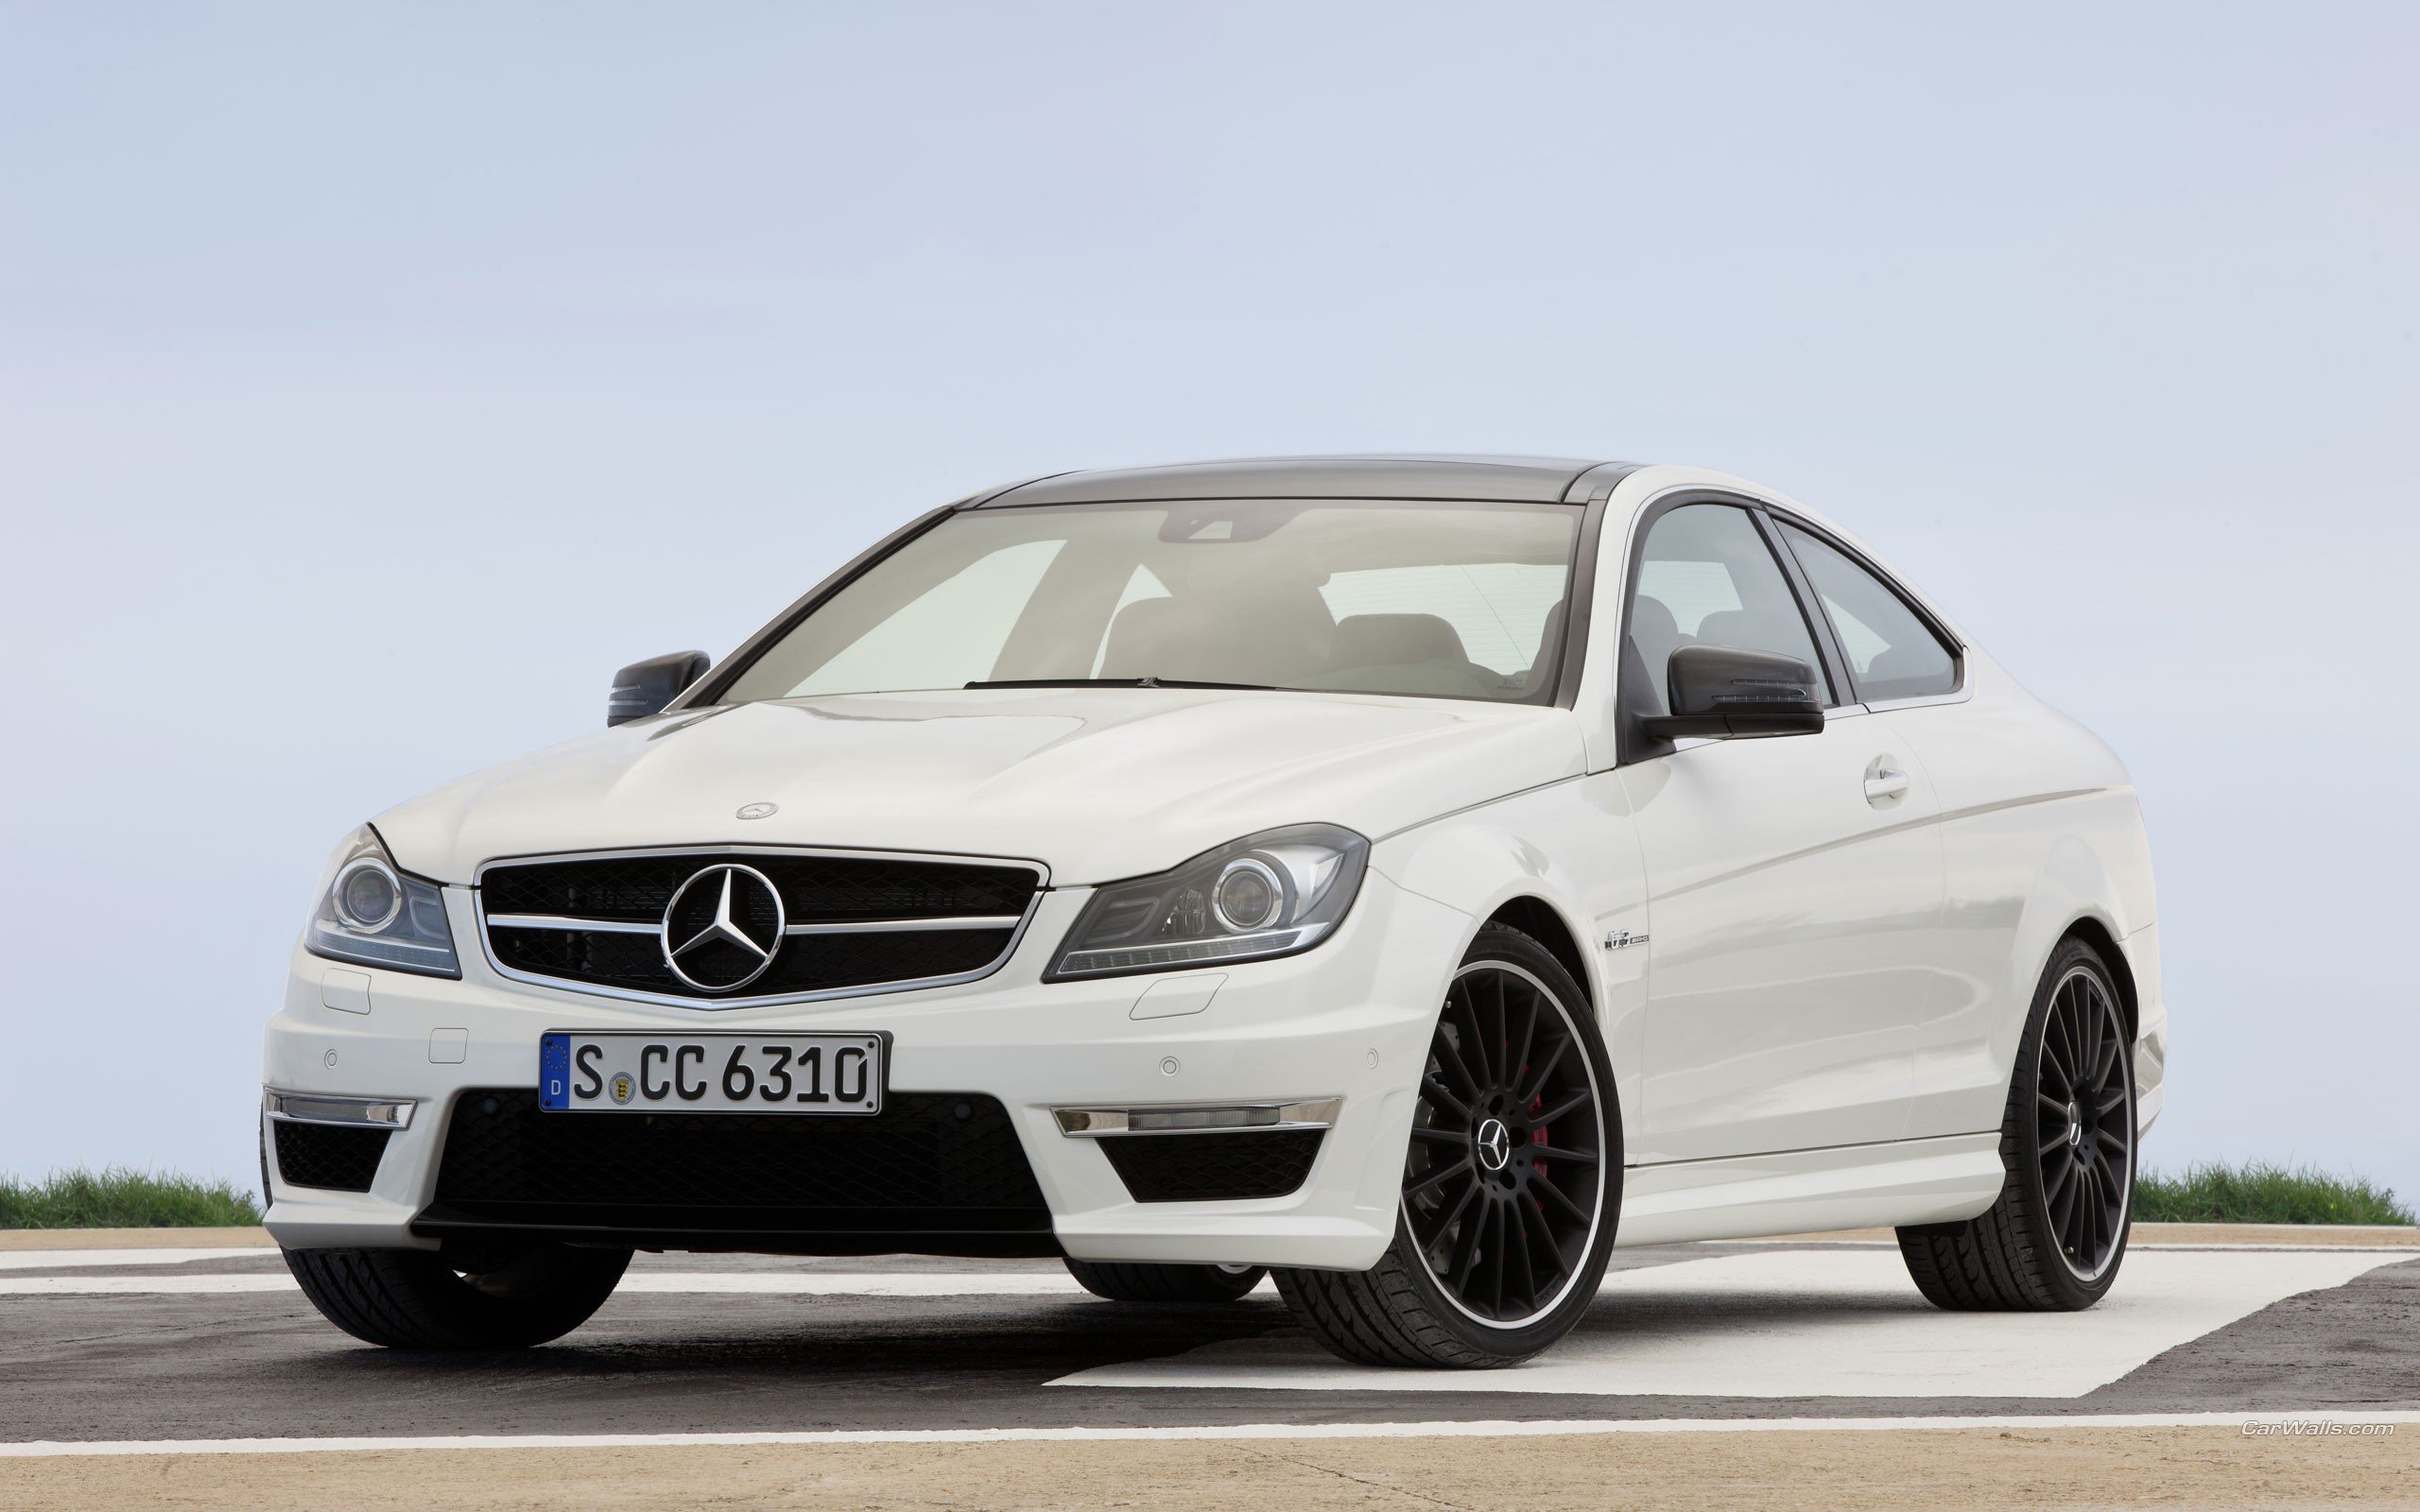 cars, Vehicles, Coupe, White, Cars, Mercedes benz Wallpaper